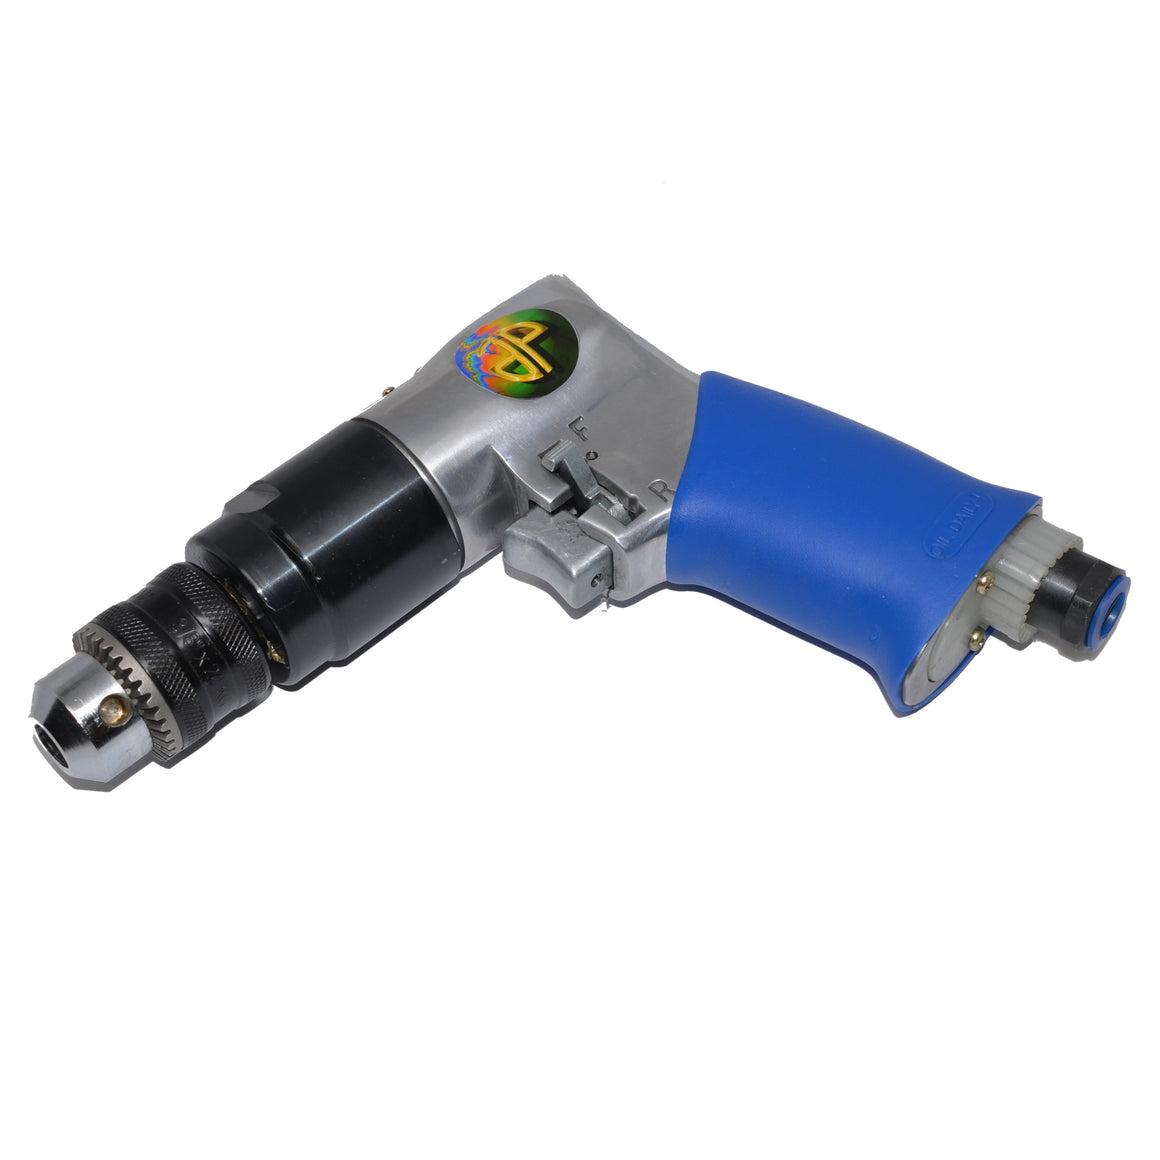 525C - 3/8" Reversible Drill; 1,800 rpm